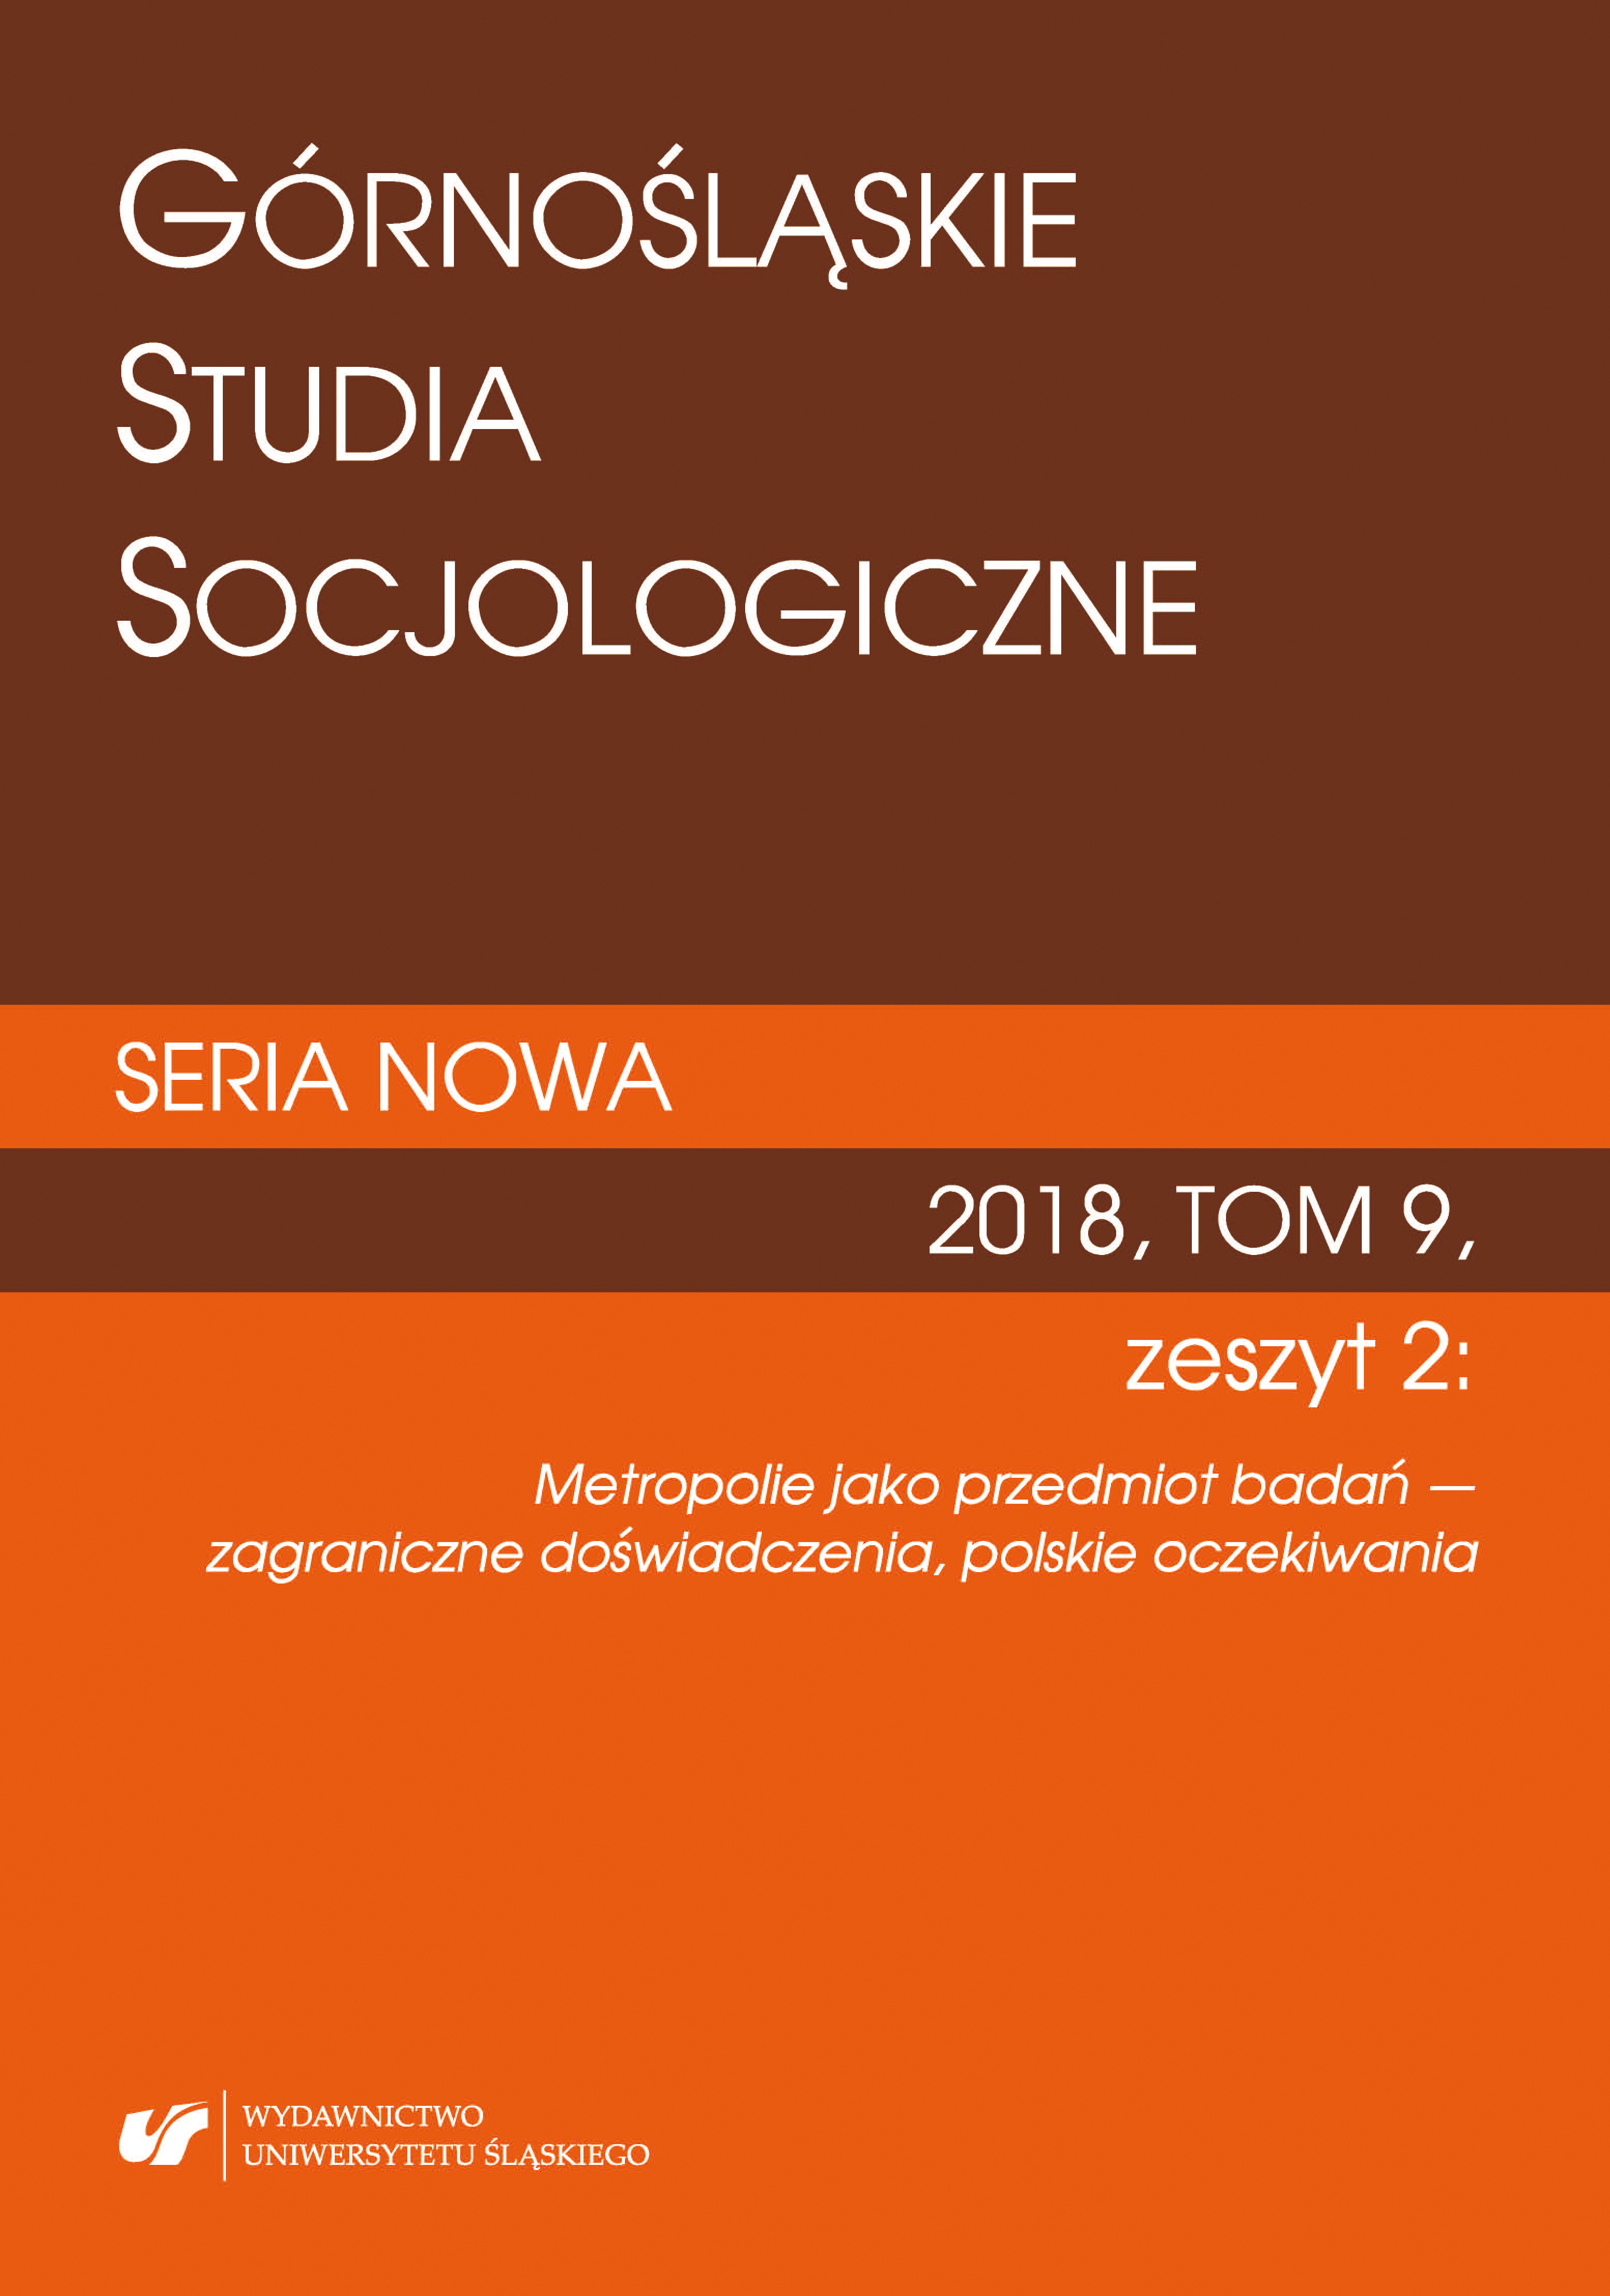 The role of the Observatory of Urban and Metropolitan Processes in the process of creating the Upper Silesian and Zagłębie Metropolis — from a knowledge deficit to expectations of the new institution Cover Image